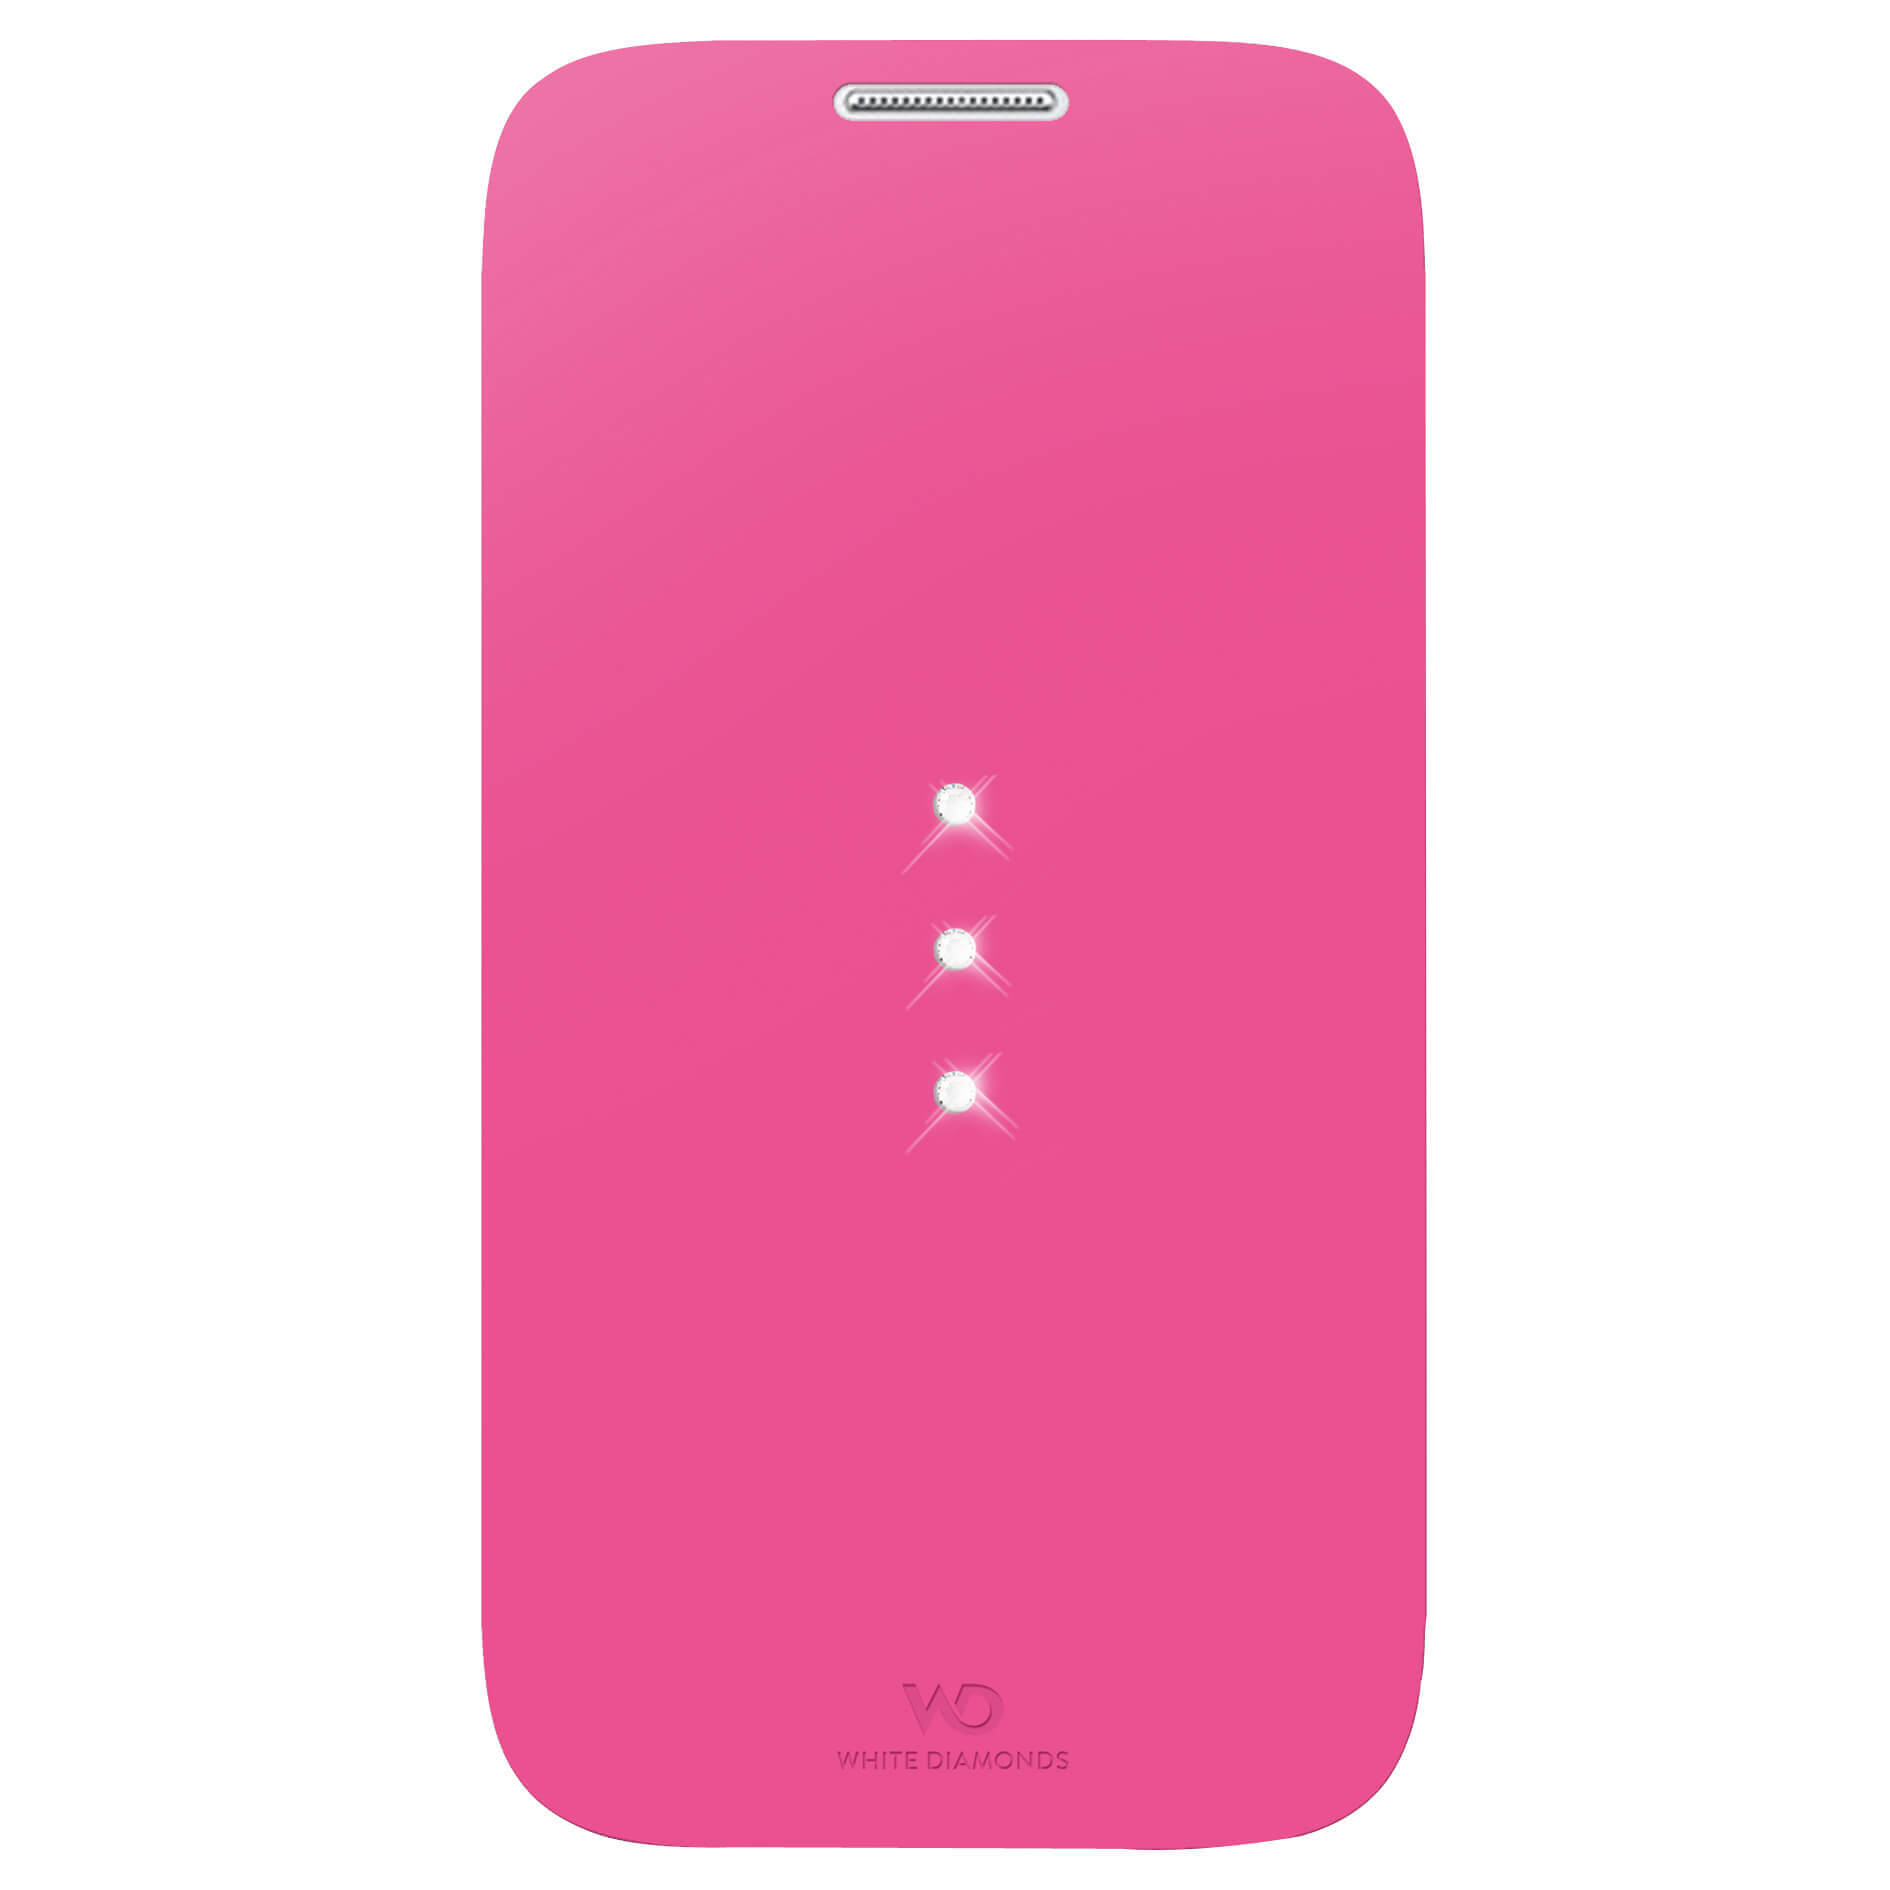 Crystal Booklet Case for Sams ung Galaxy S 4 mini, pink